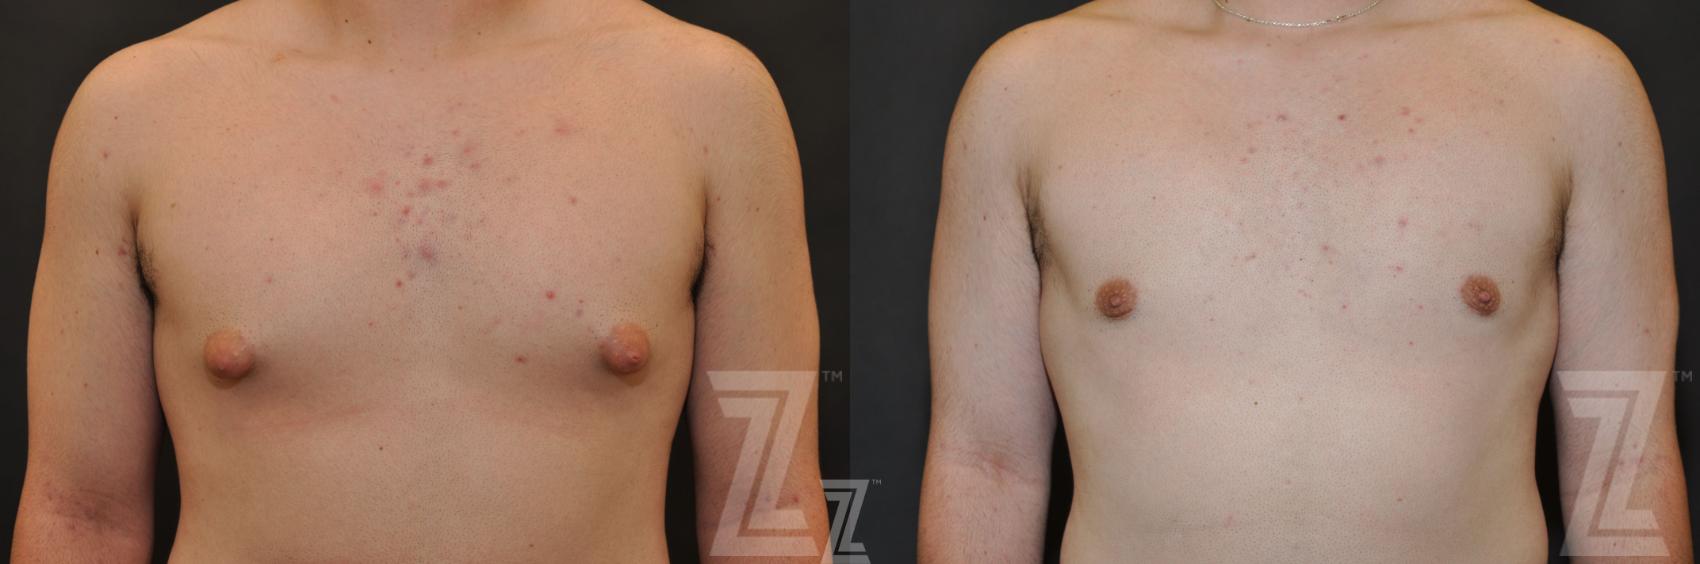 Male Breast Reduction Before & After Photo | Austin, TX | The Piazza Center for Plastic Surgery & Advanced Skin Care